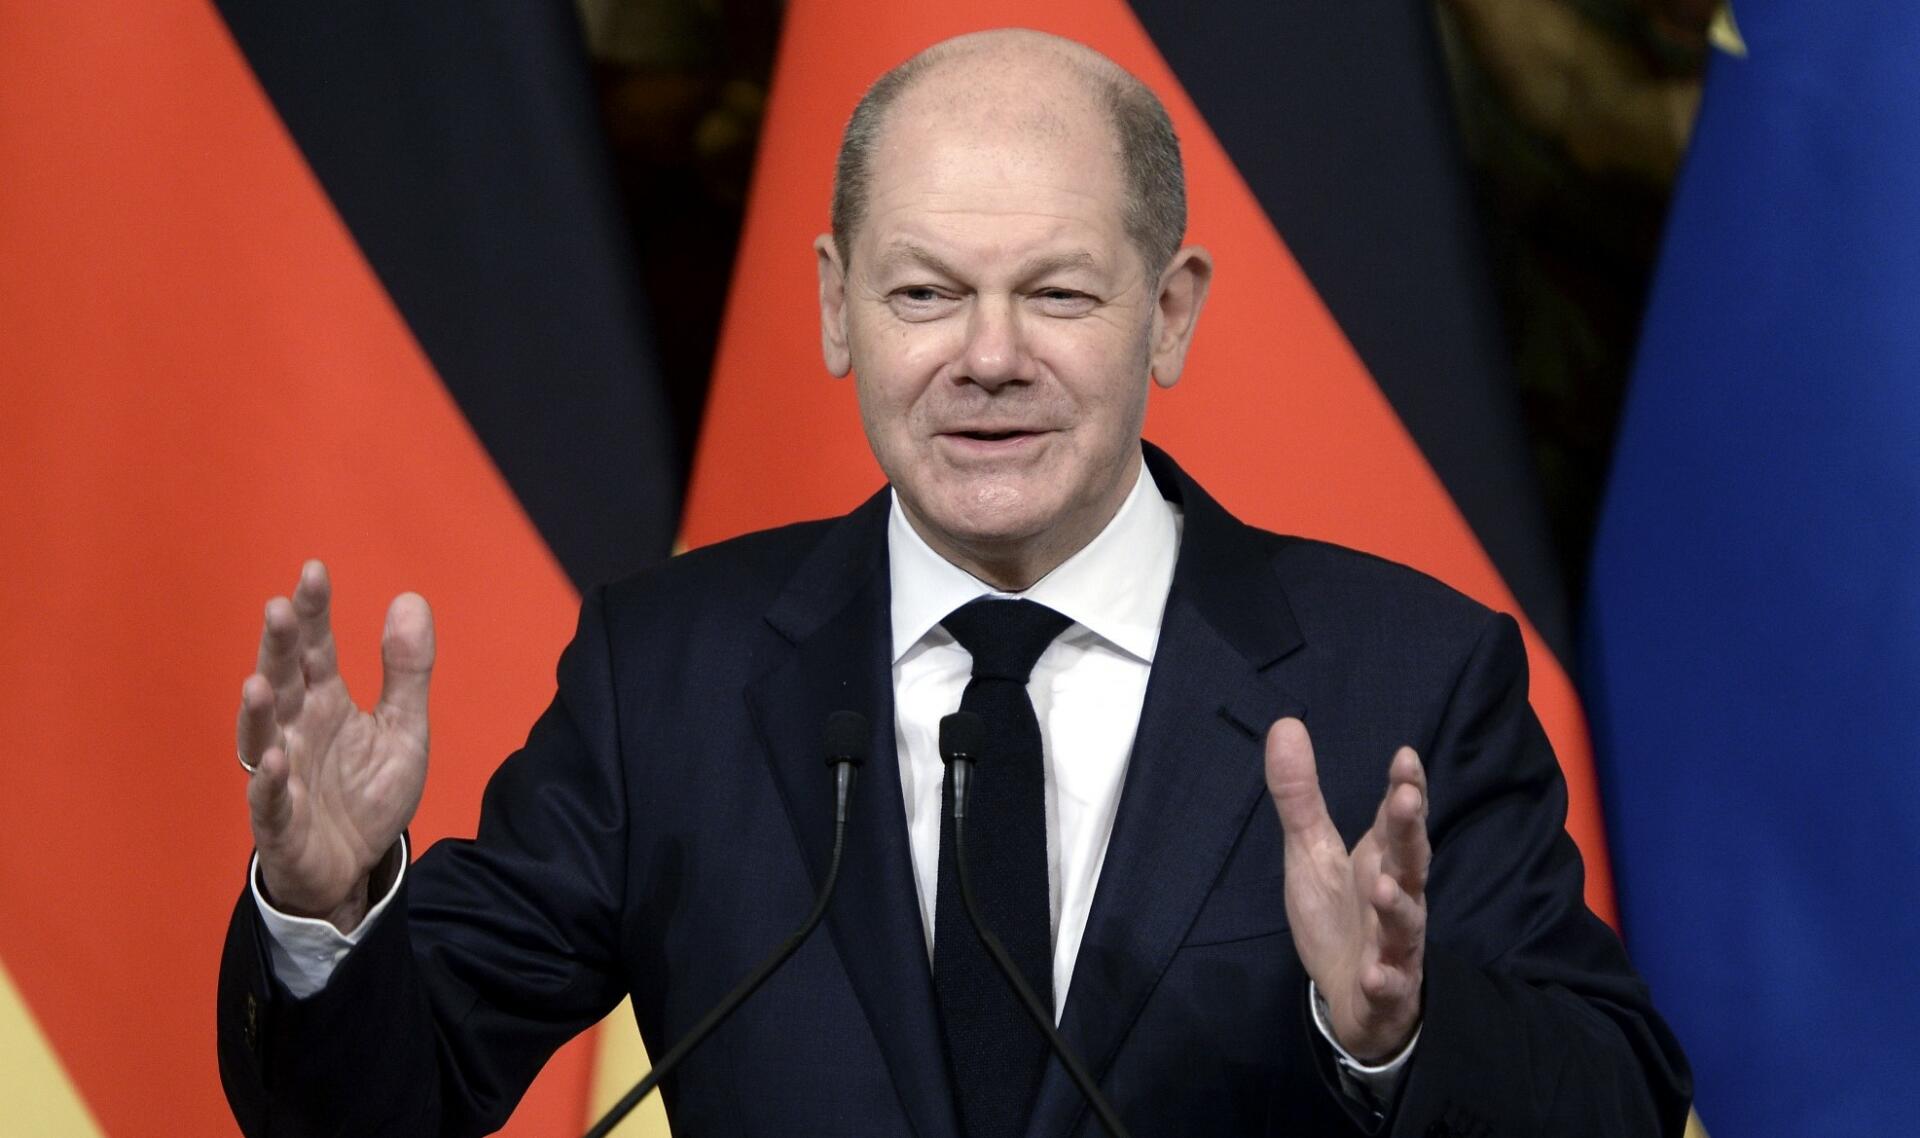 Scholz thanked Ilham Aliyev for his struggle